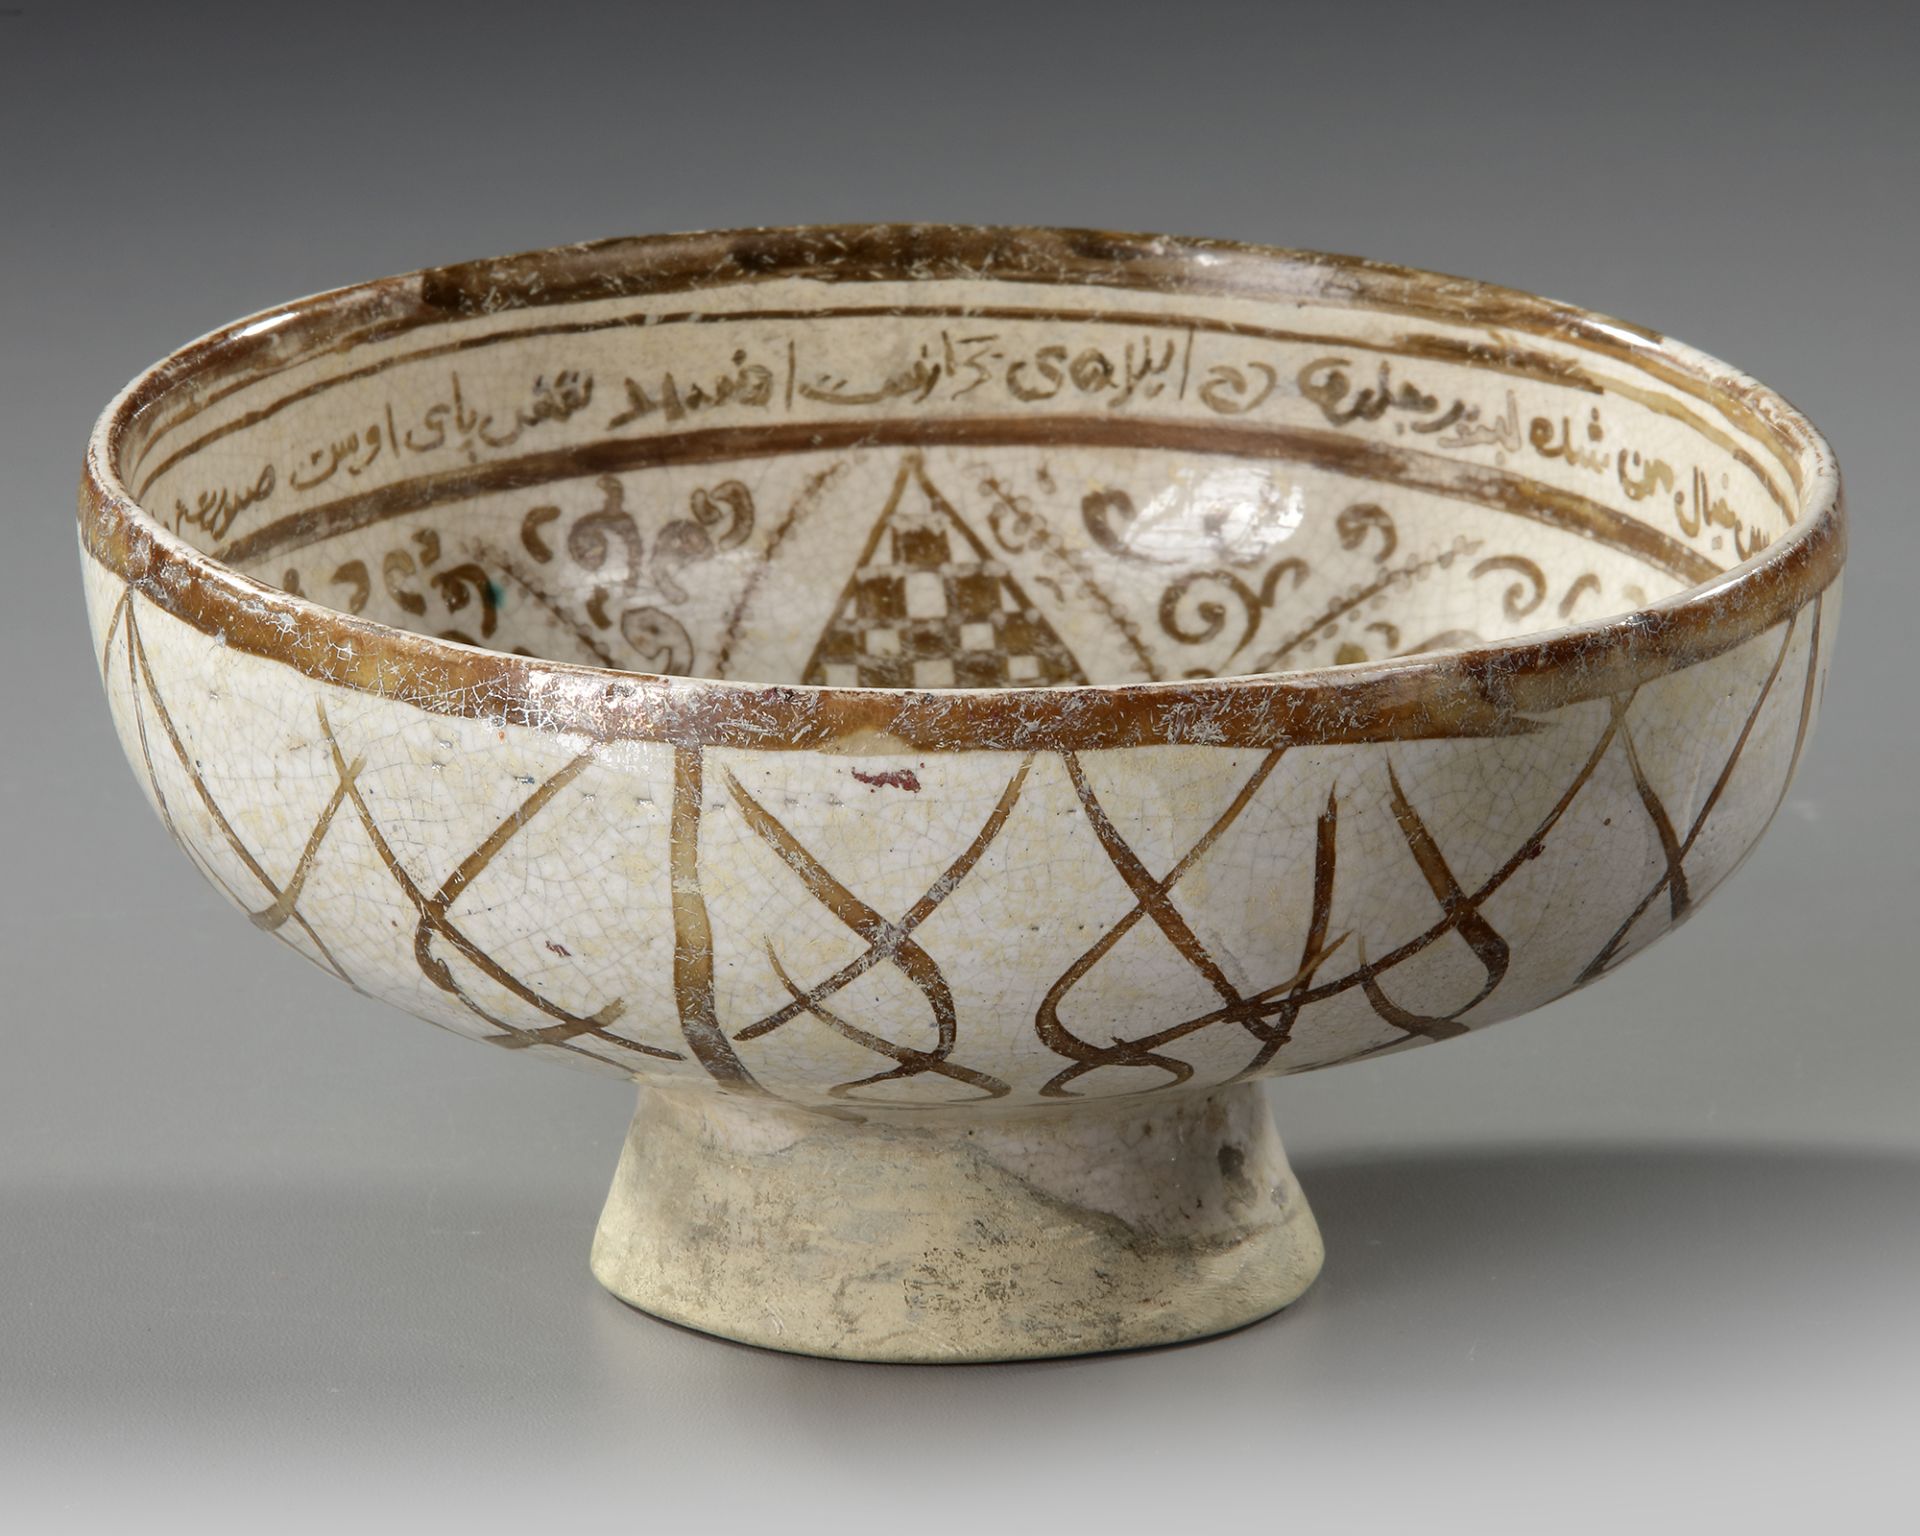 A KASHAN LUSTRE POTTERY BOWL, PERSIA, LATE 12TH - EARLY 13TH CENTURY - Image 6 of 8